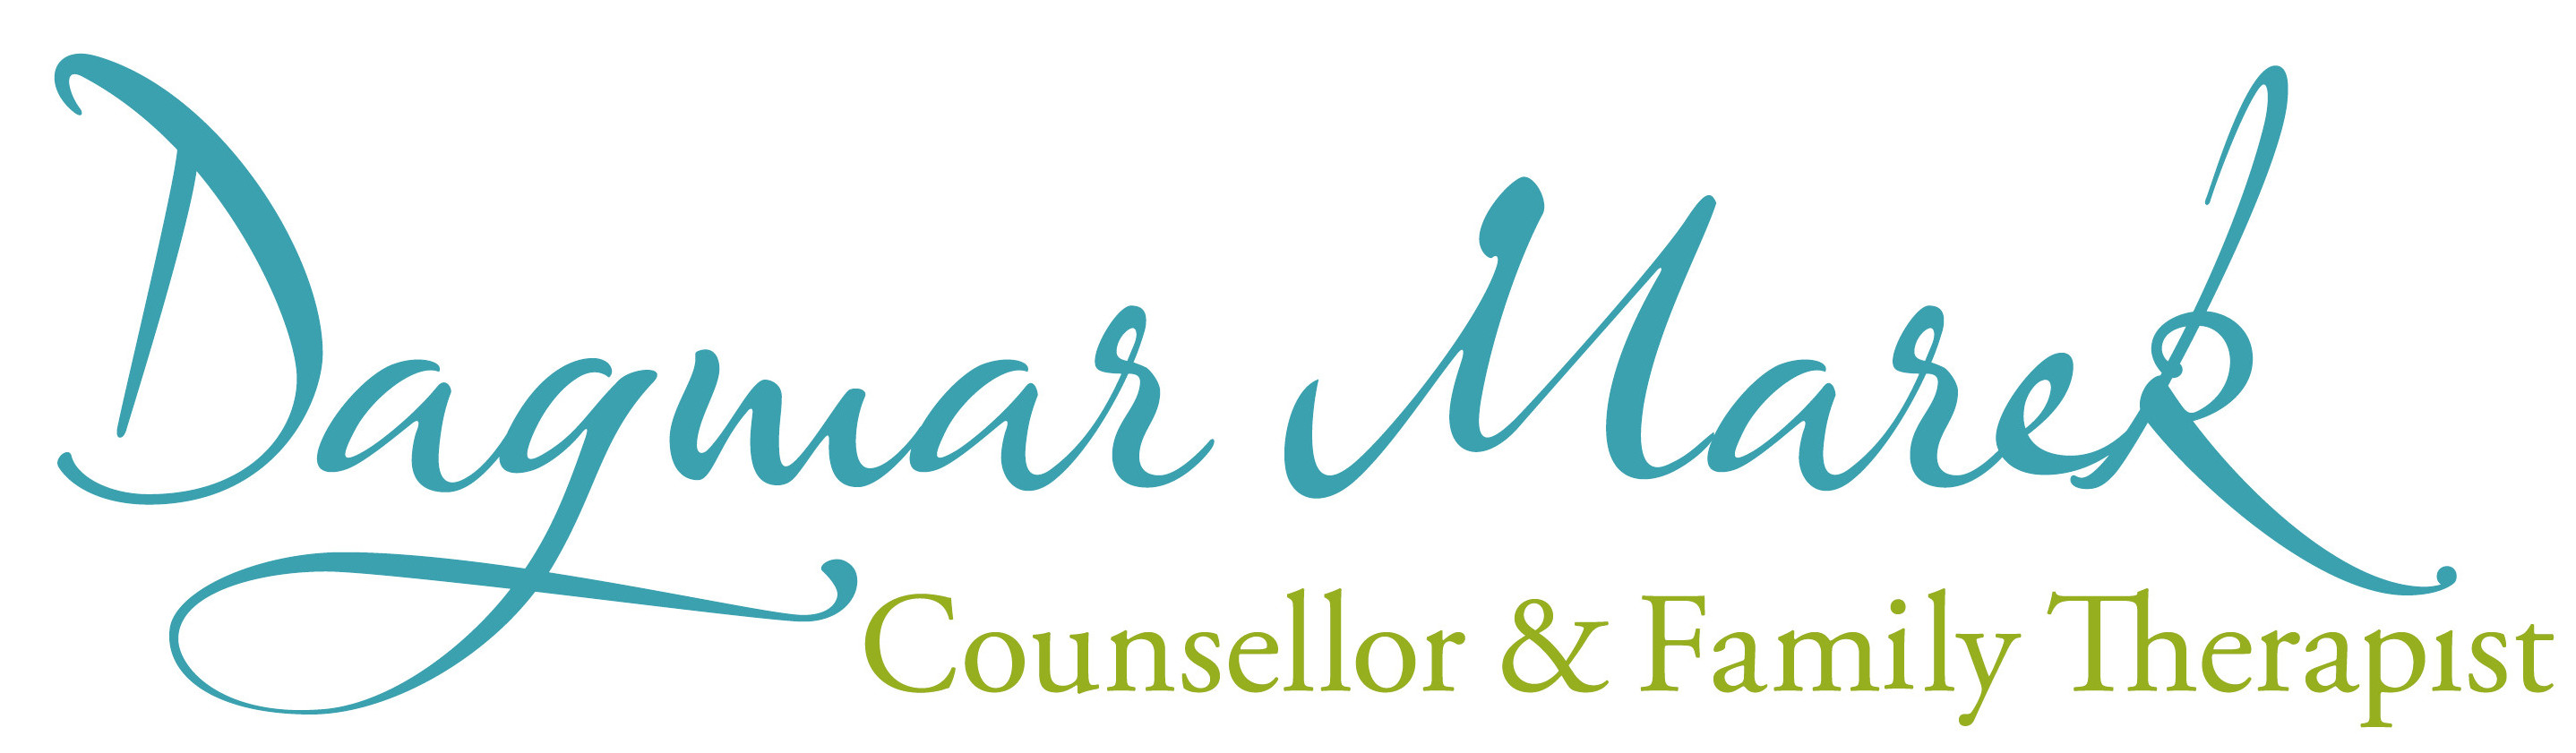 Counsellor & Family Therapist